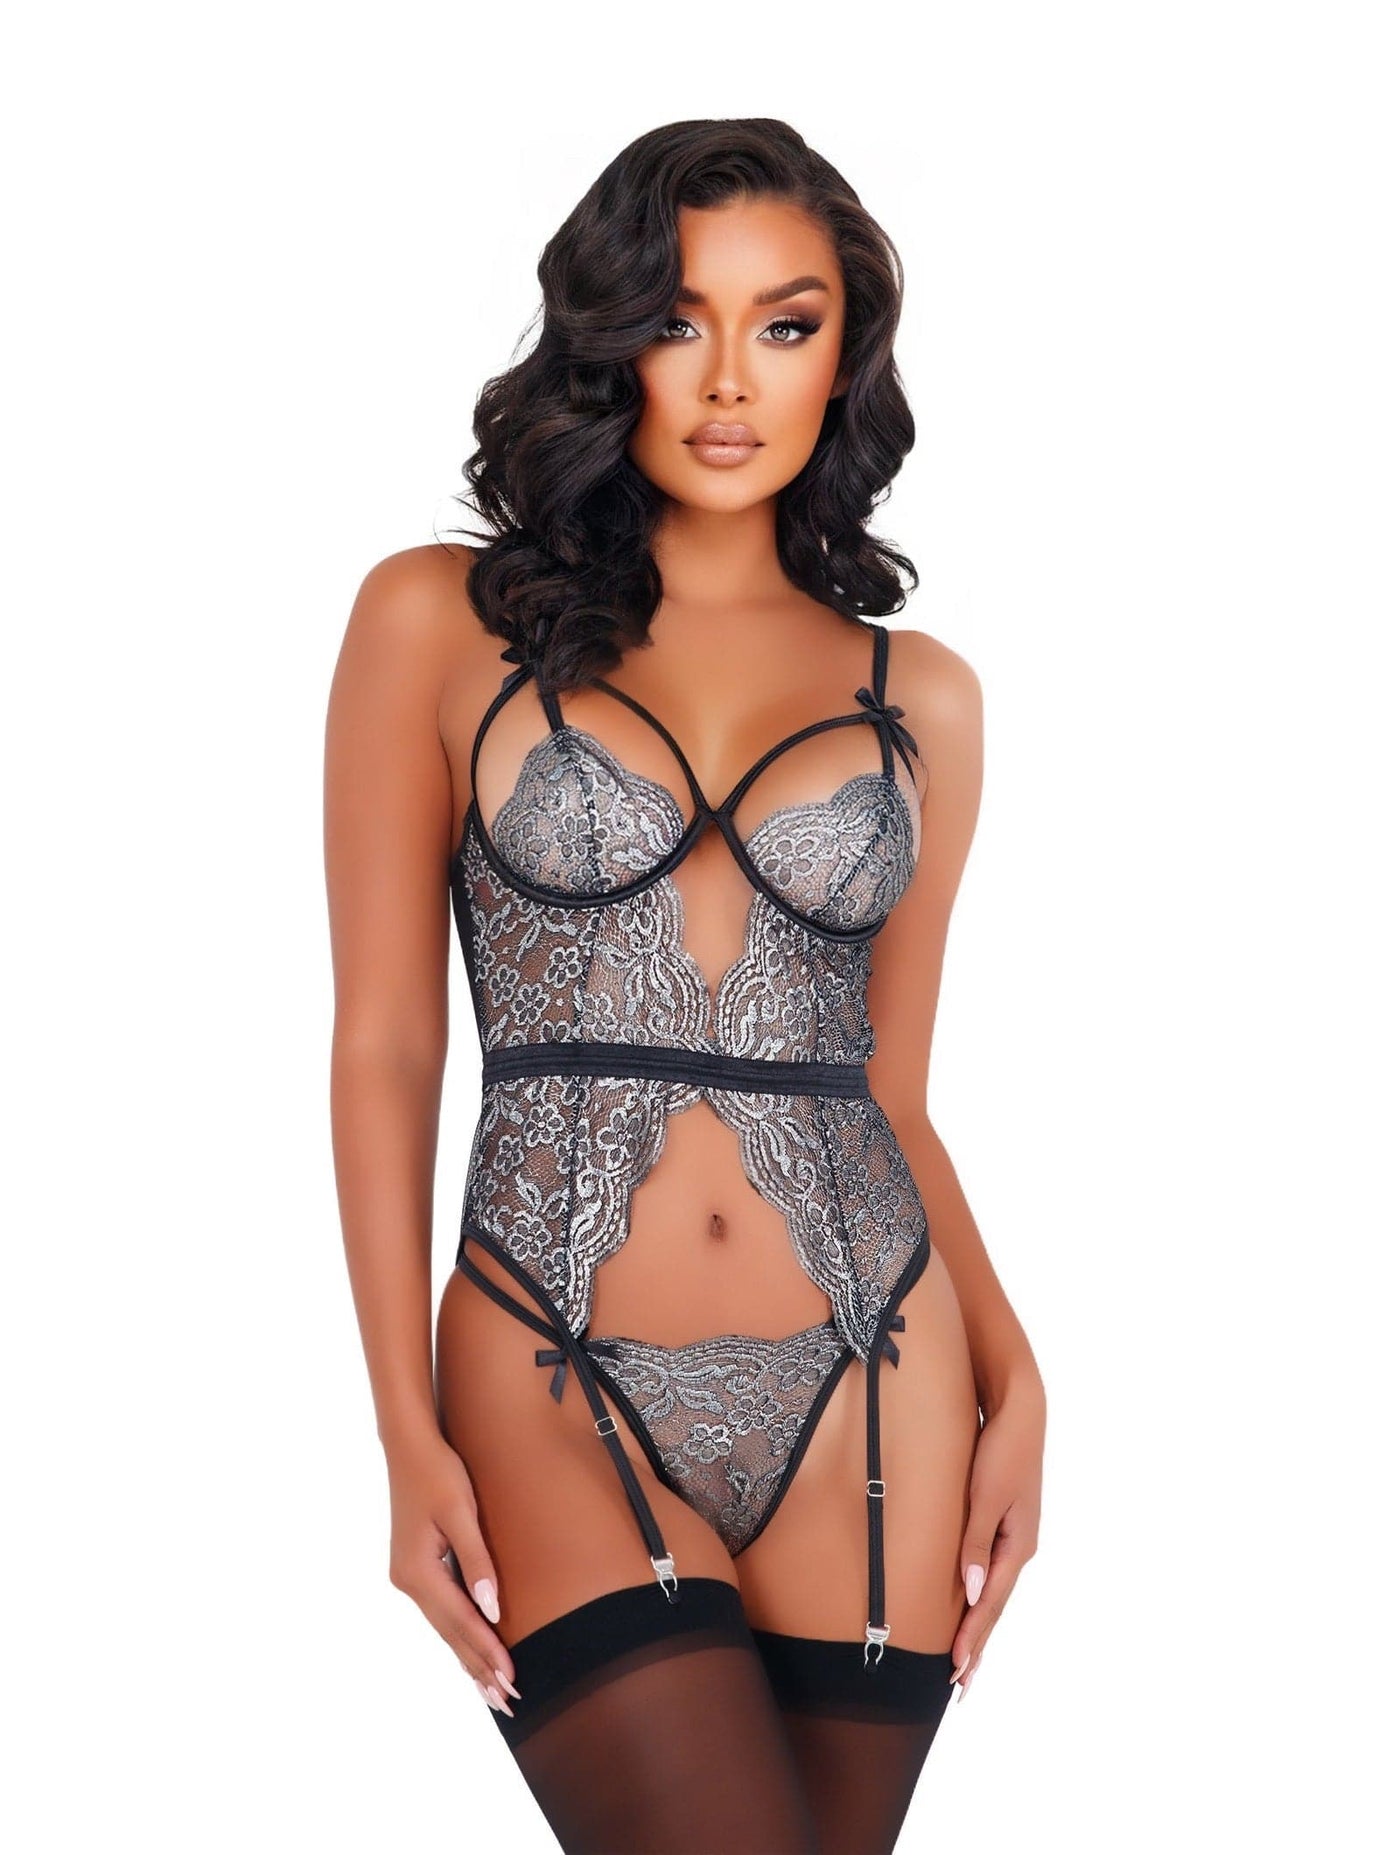 Carina Bustier - For Love of Lingerie